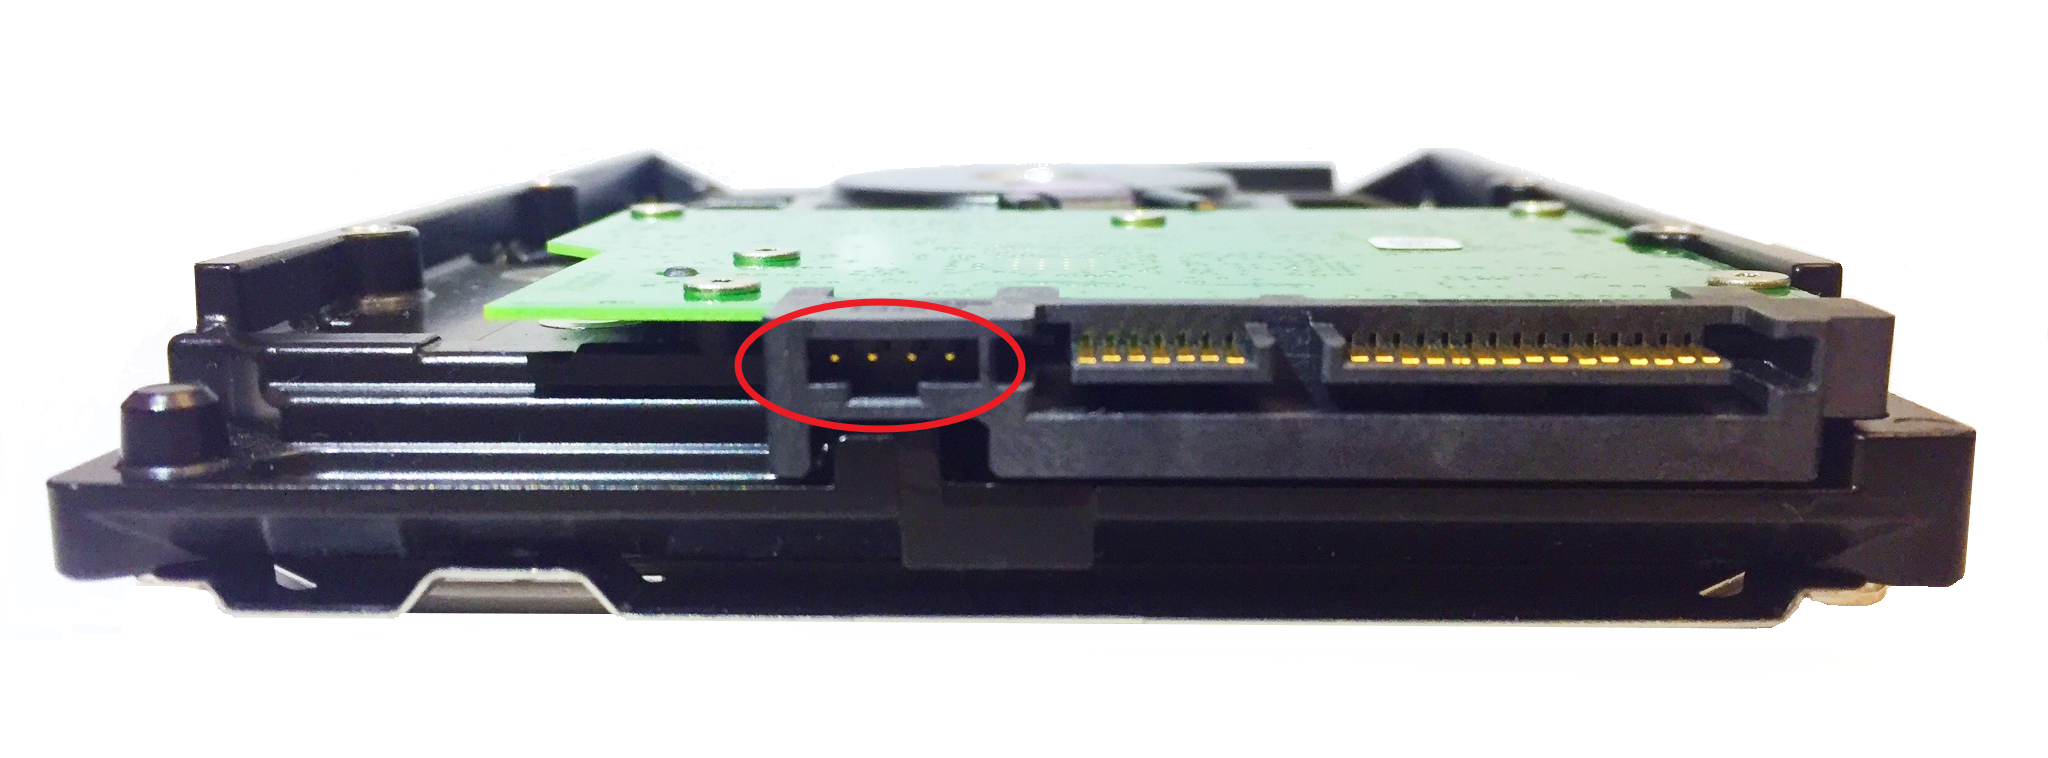 larynx snap Assault Connecting Seagate Drives to Serial Port